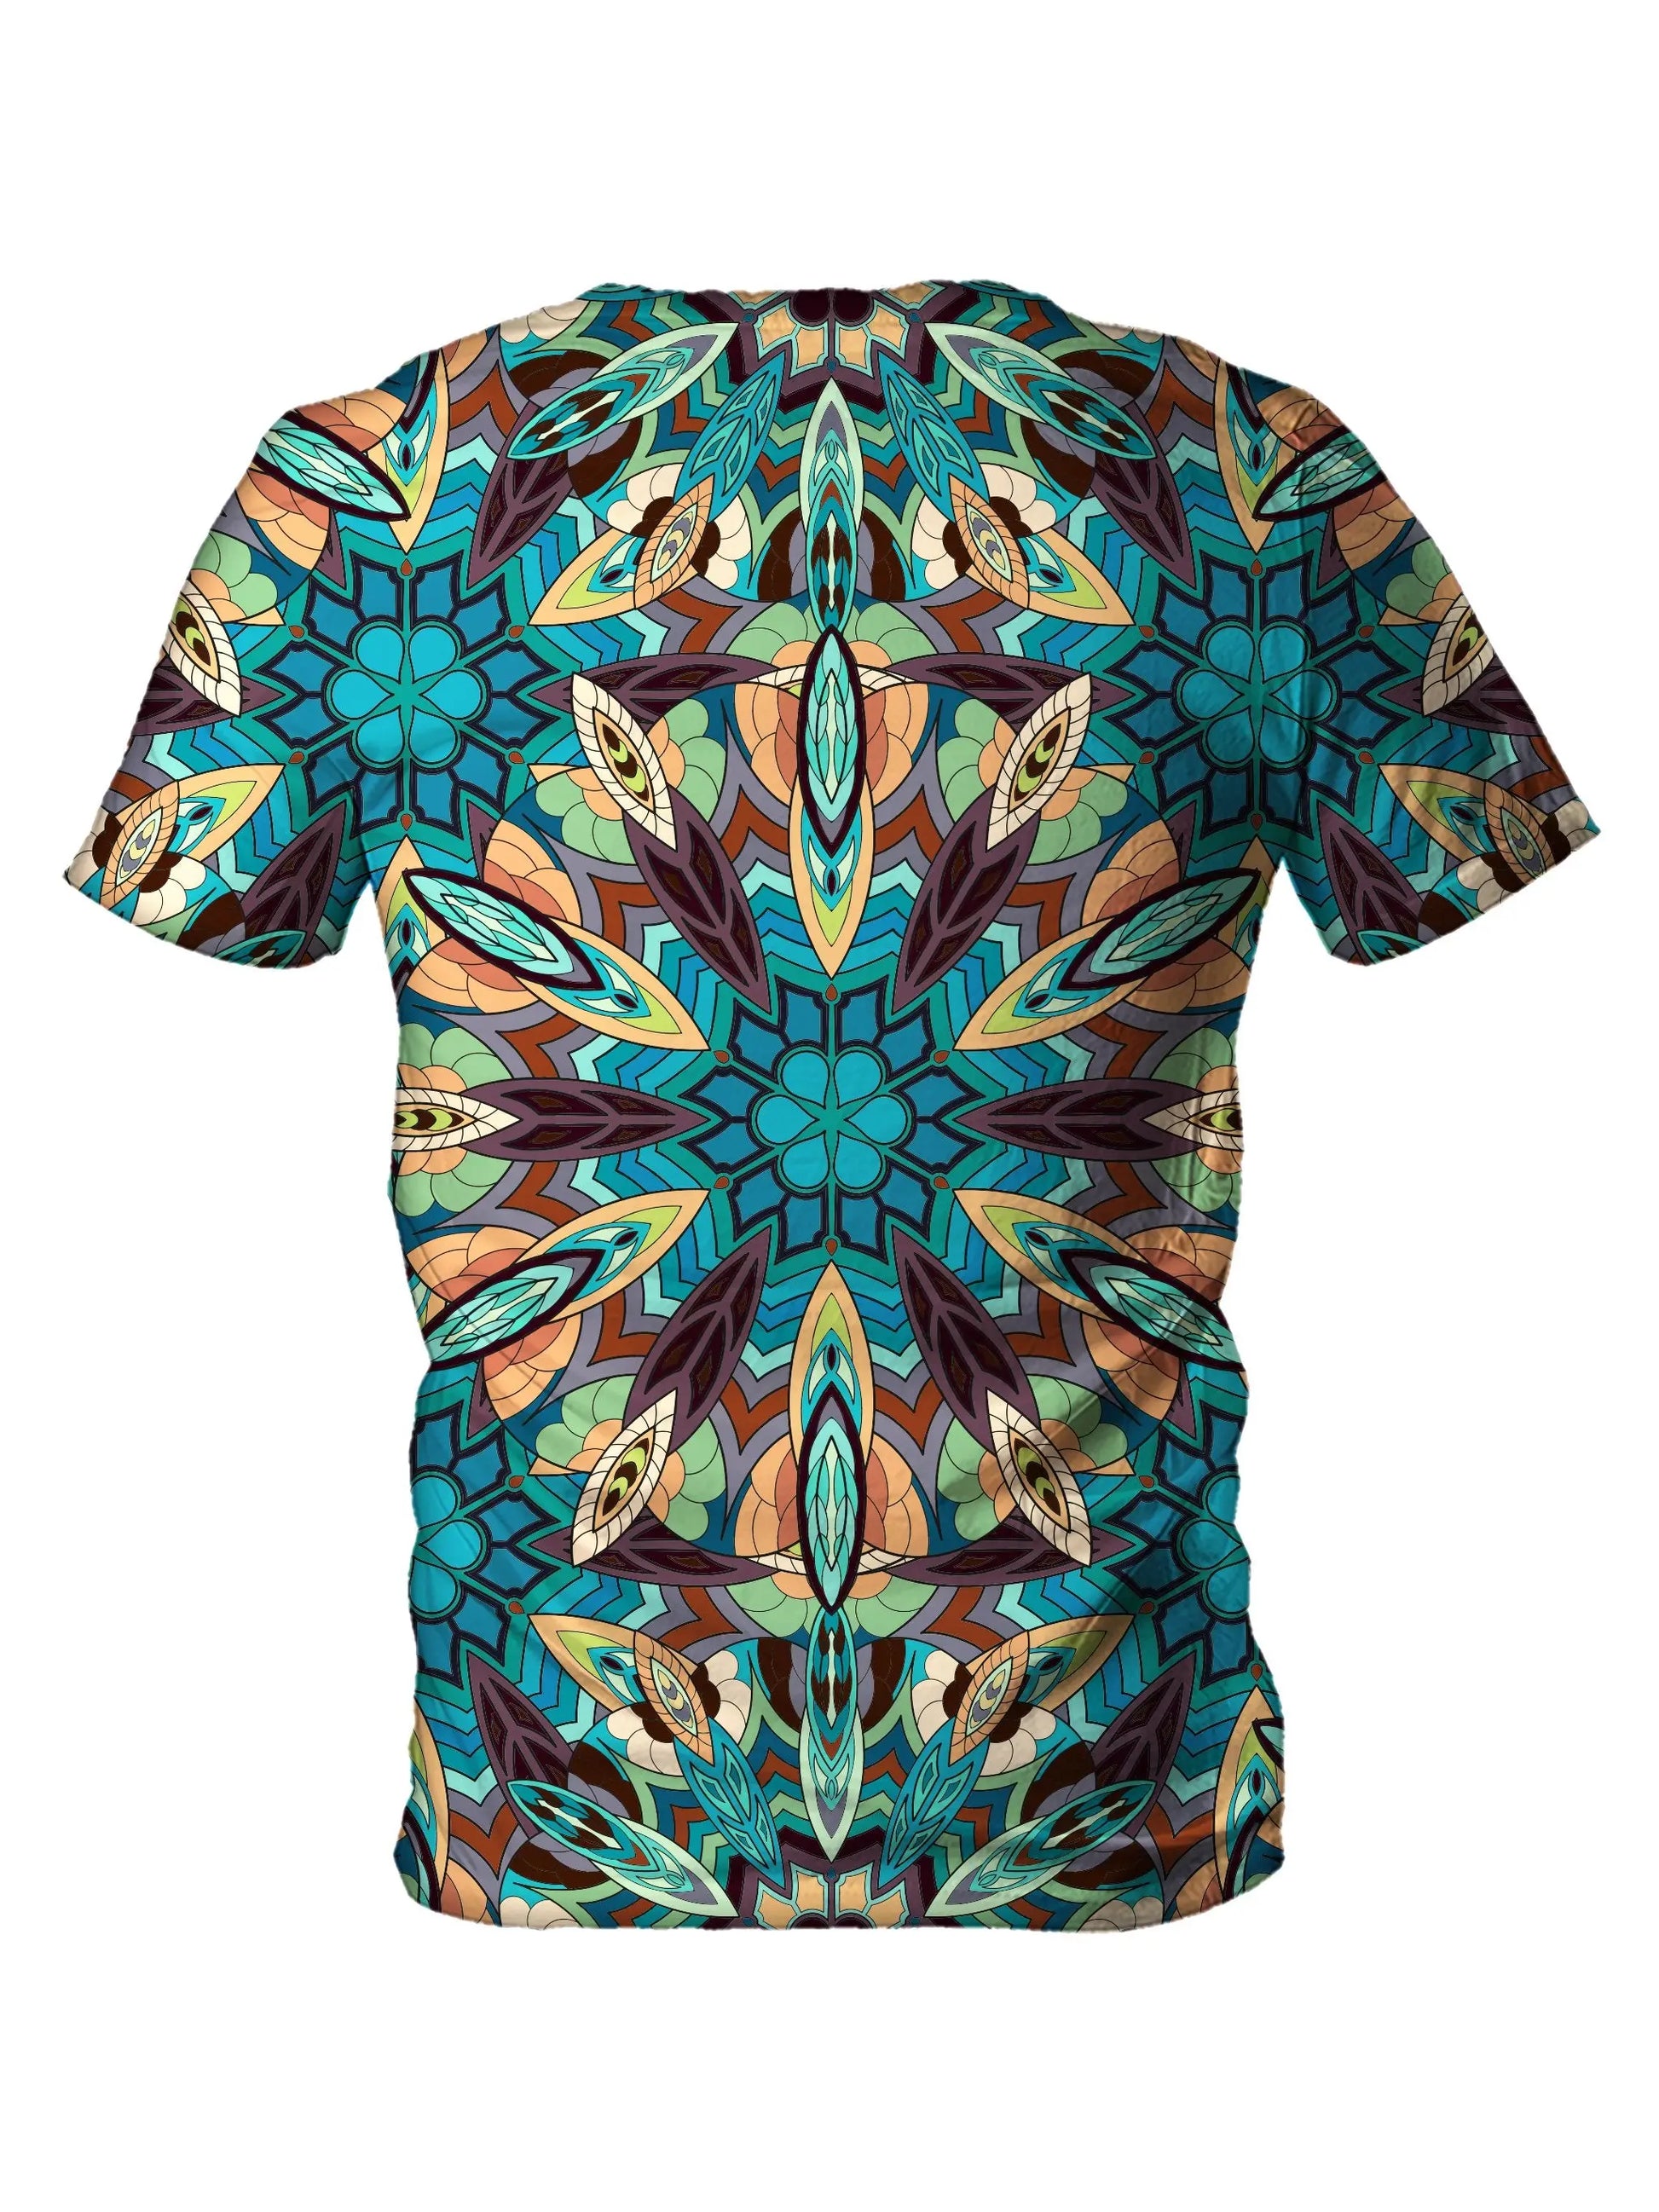 Back view of all over print psychedelic sacred geometry t shirt by Gratefully Dyed Apparel. 